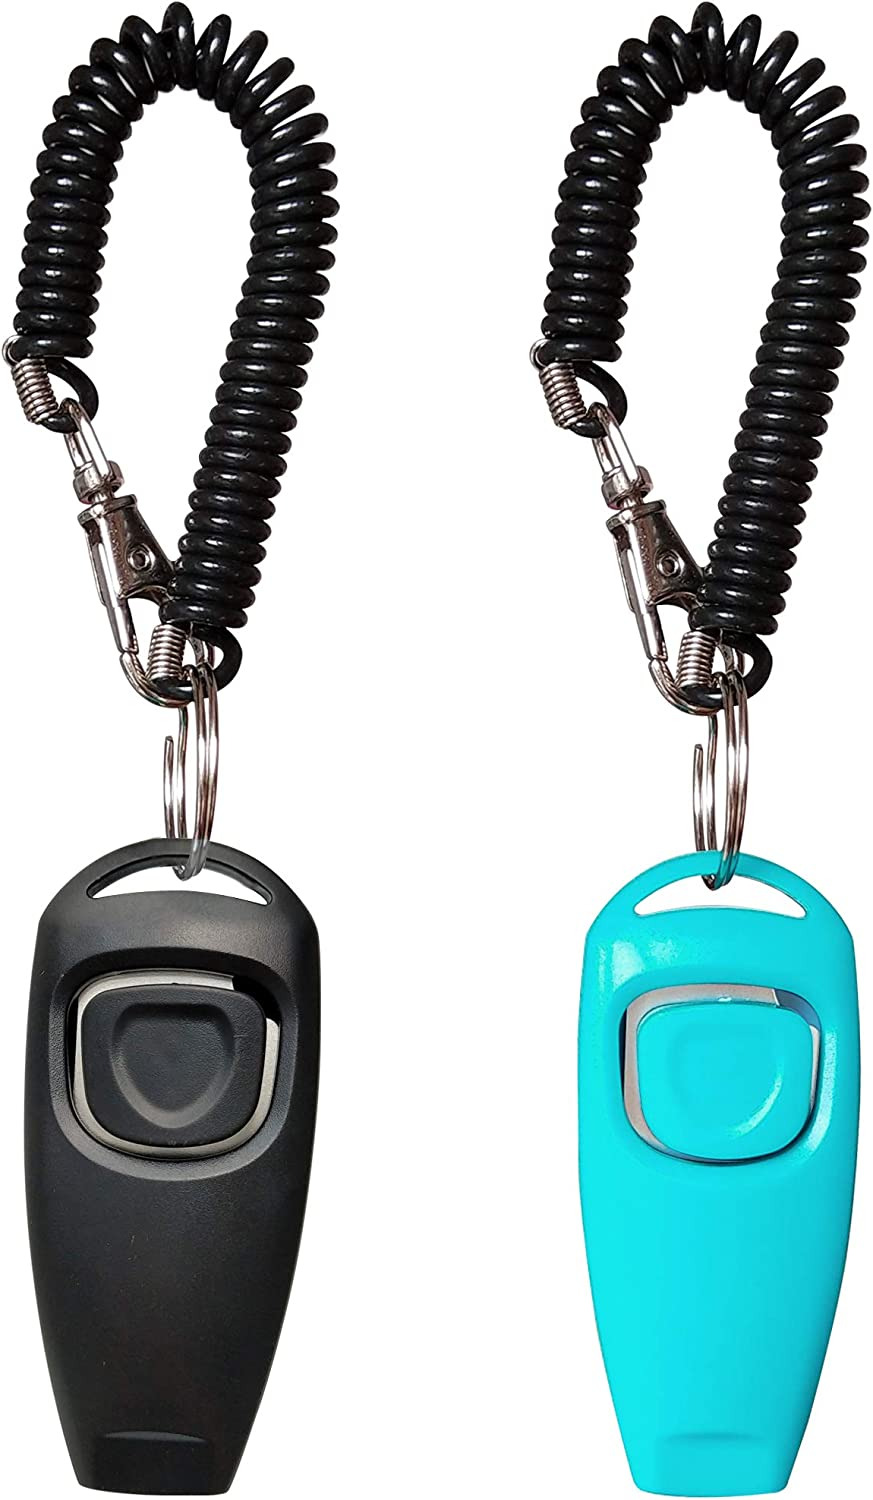 Newnewstar Pet Training Clicker Whistle with Wrist Strap - Dog Training Clickers